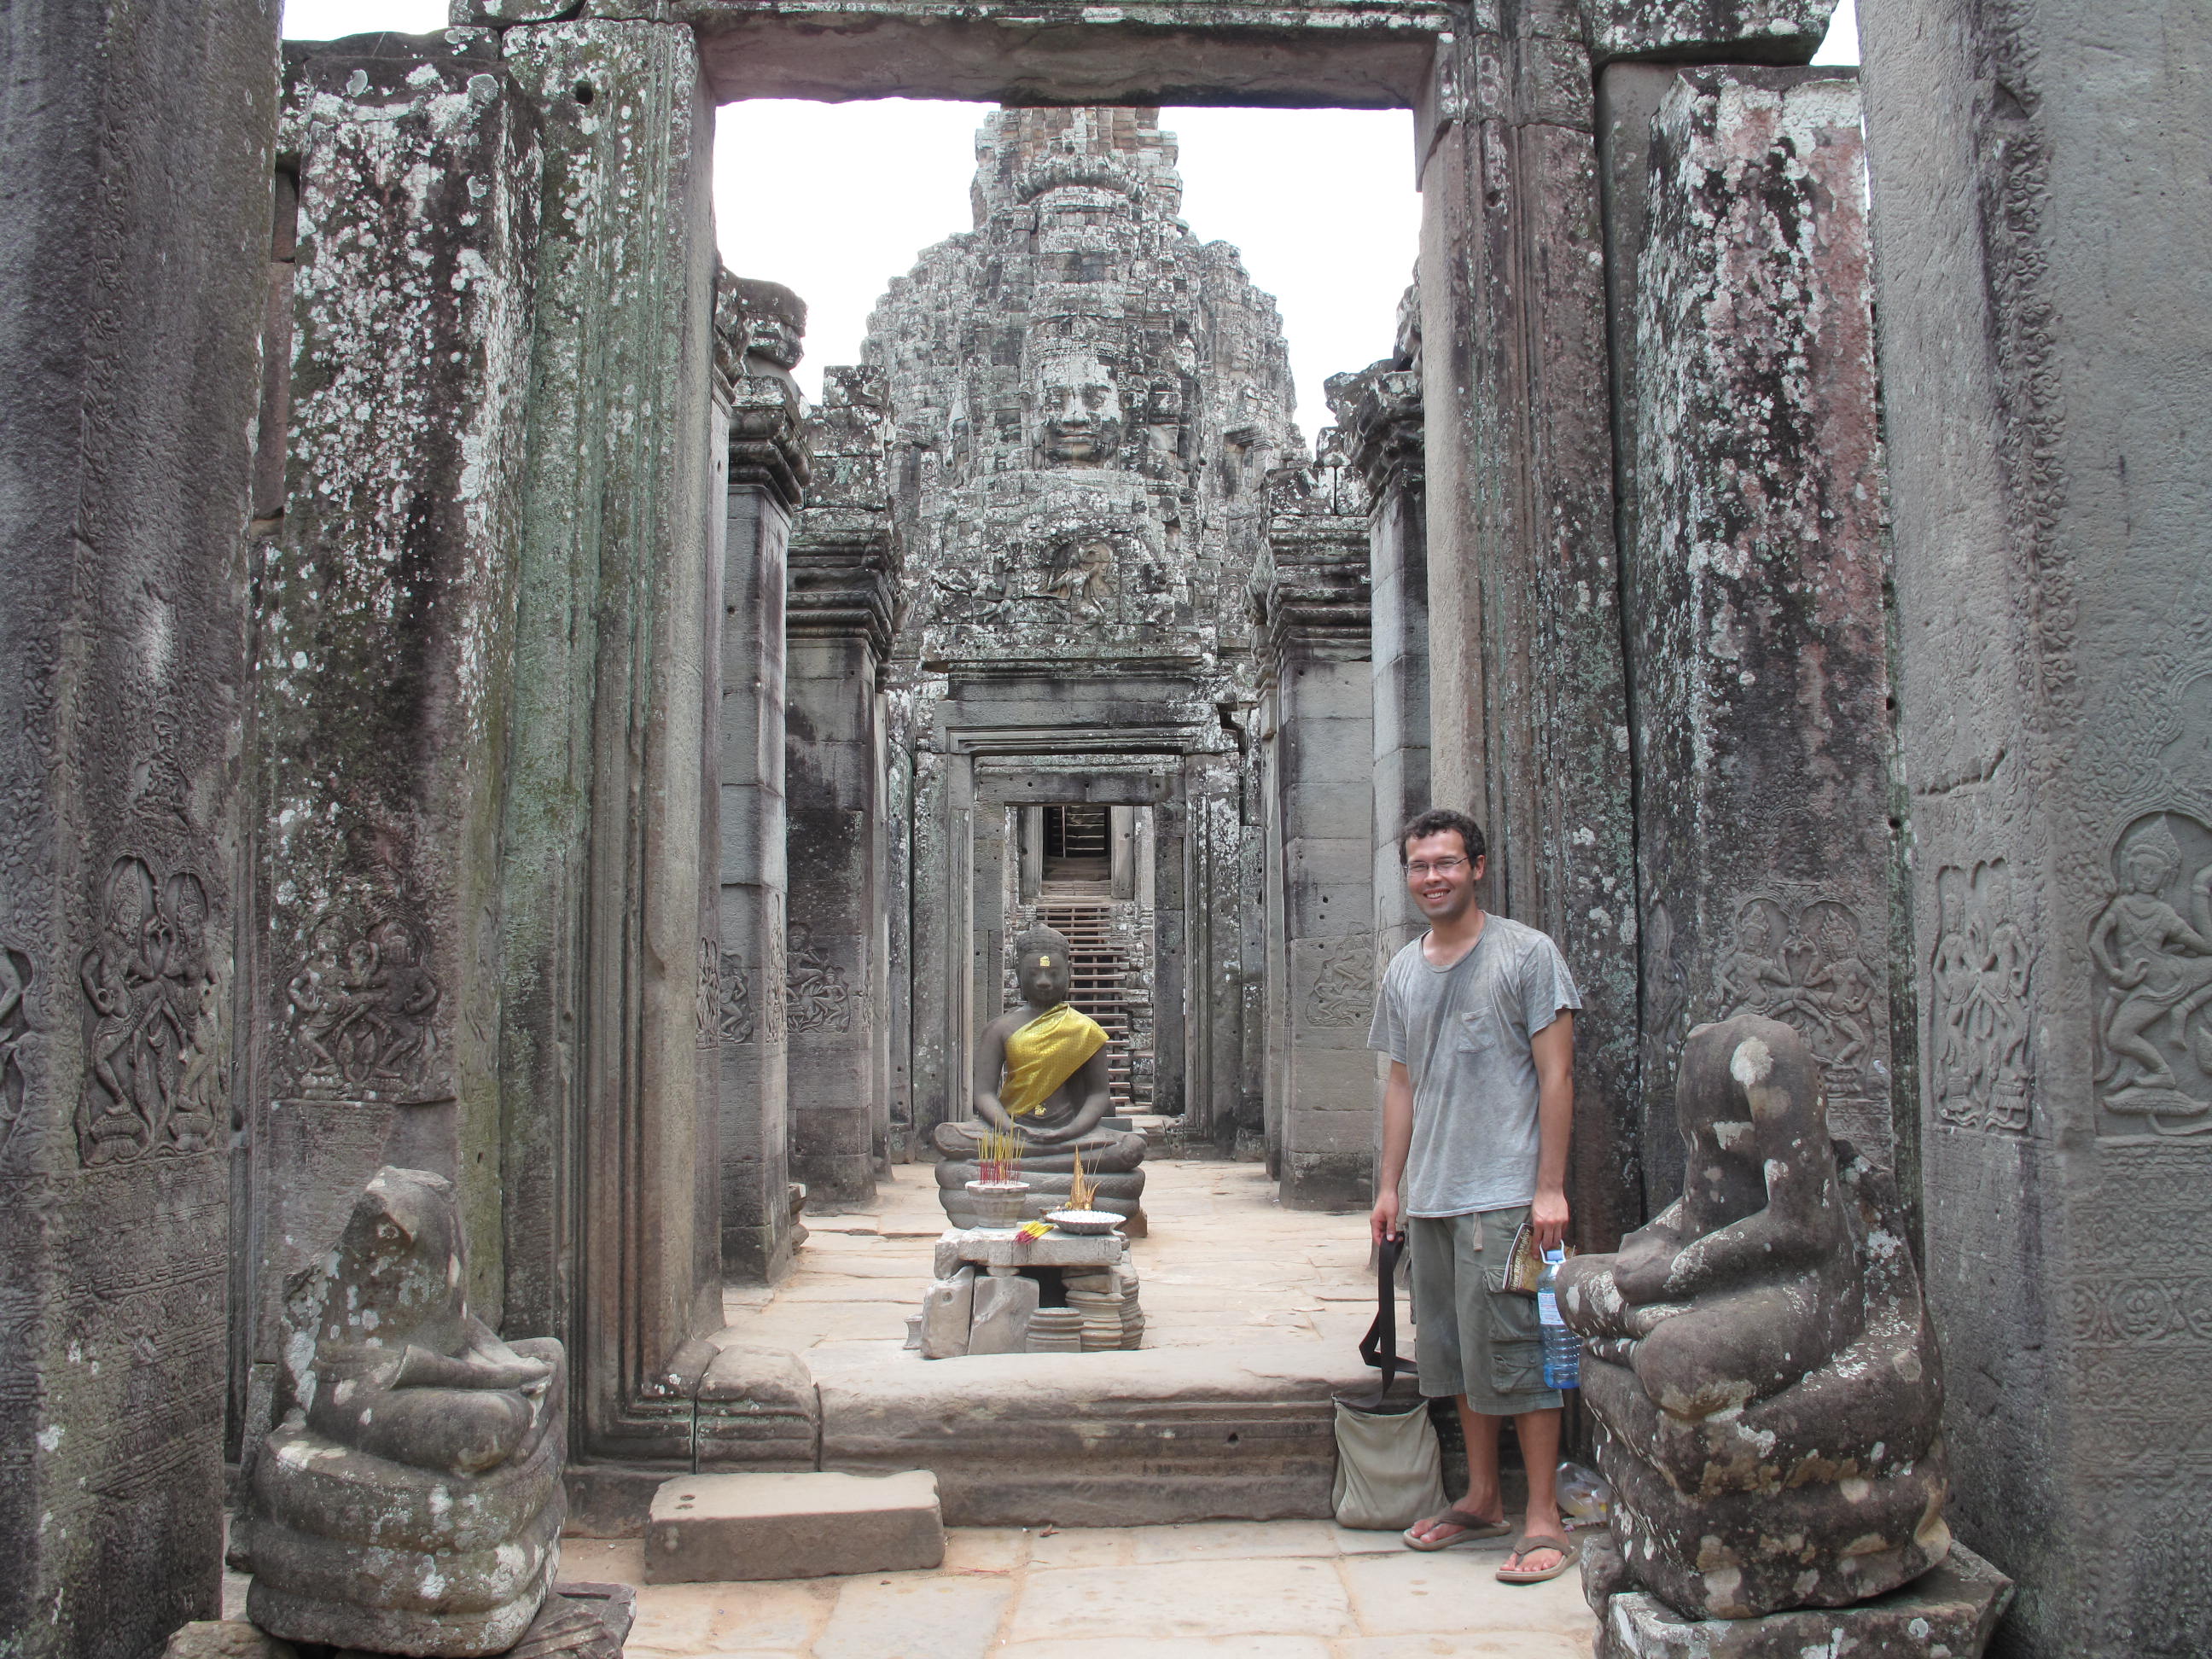 This is a picture of me inside a temple in Cambodia.